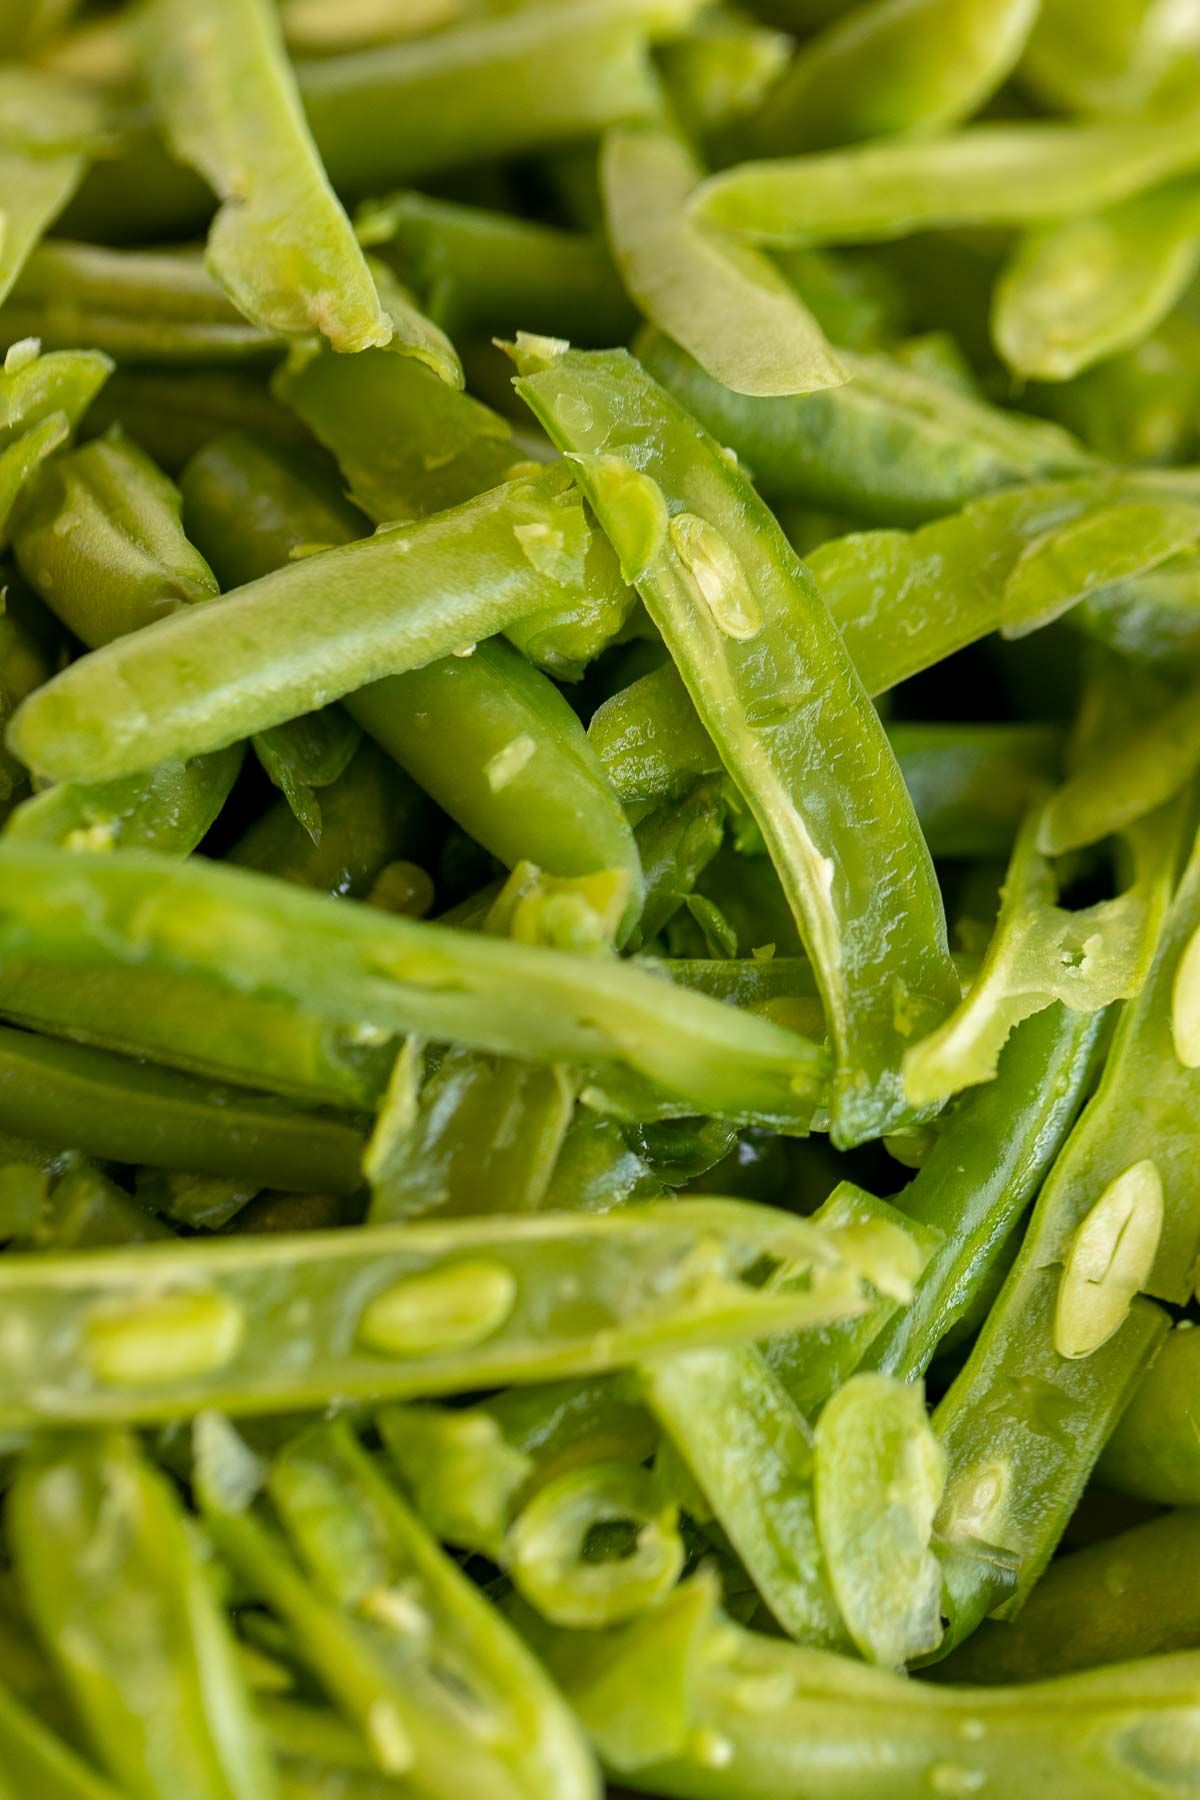 A close up of French cut green beans.